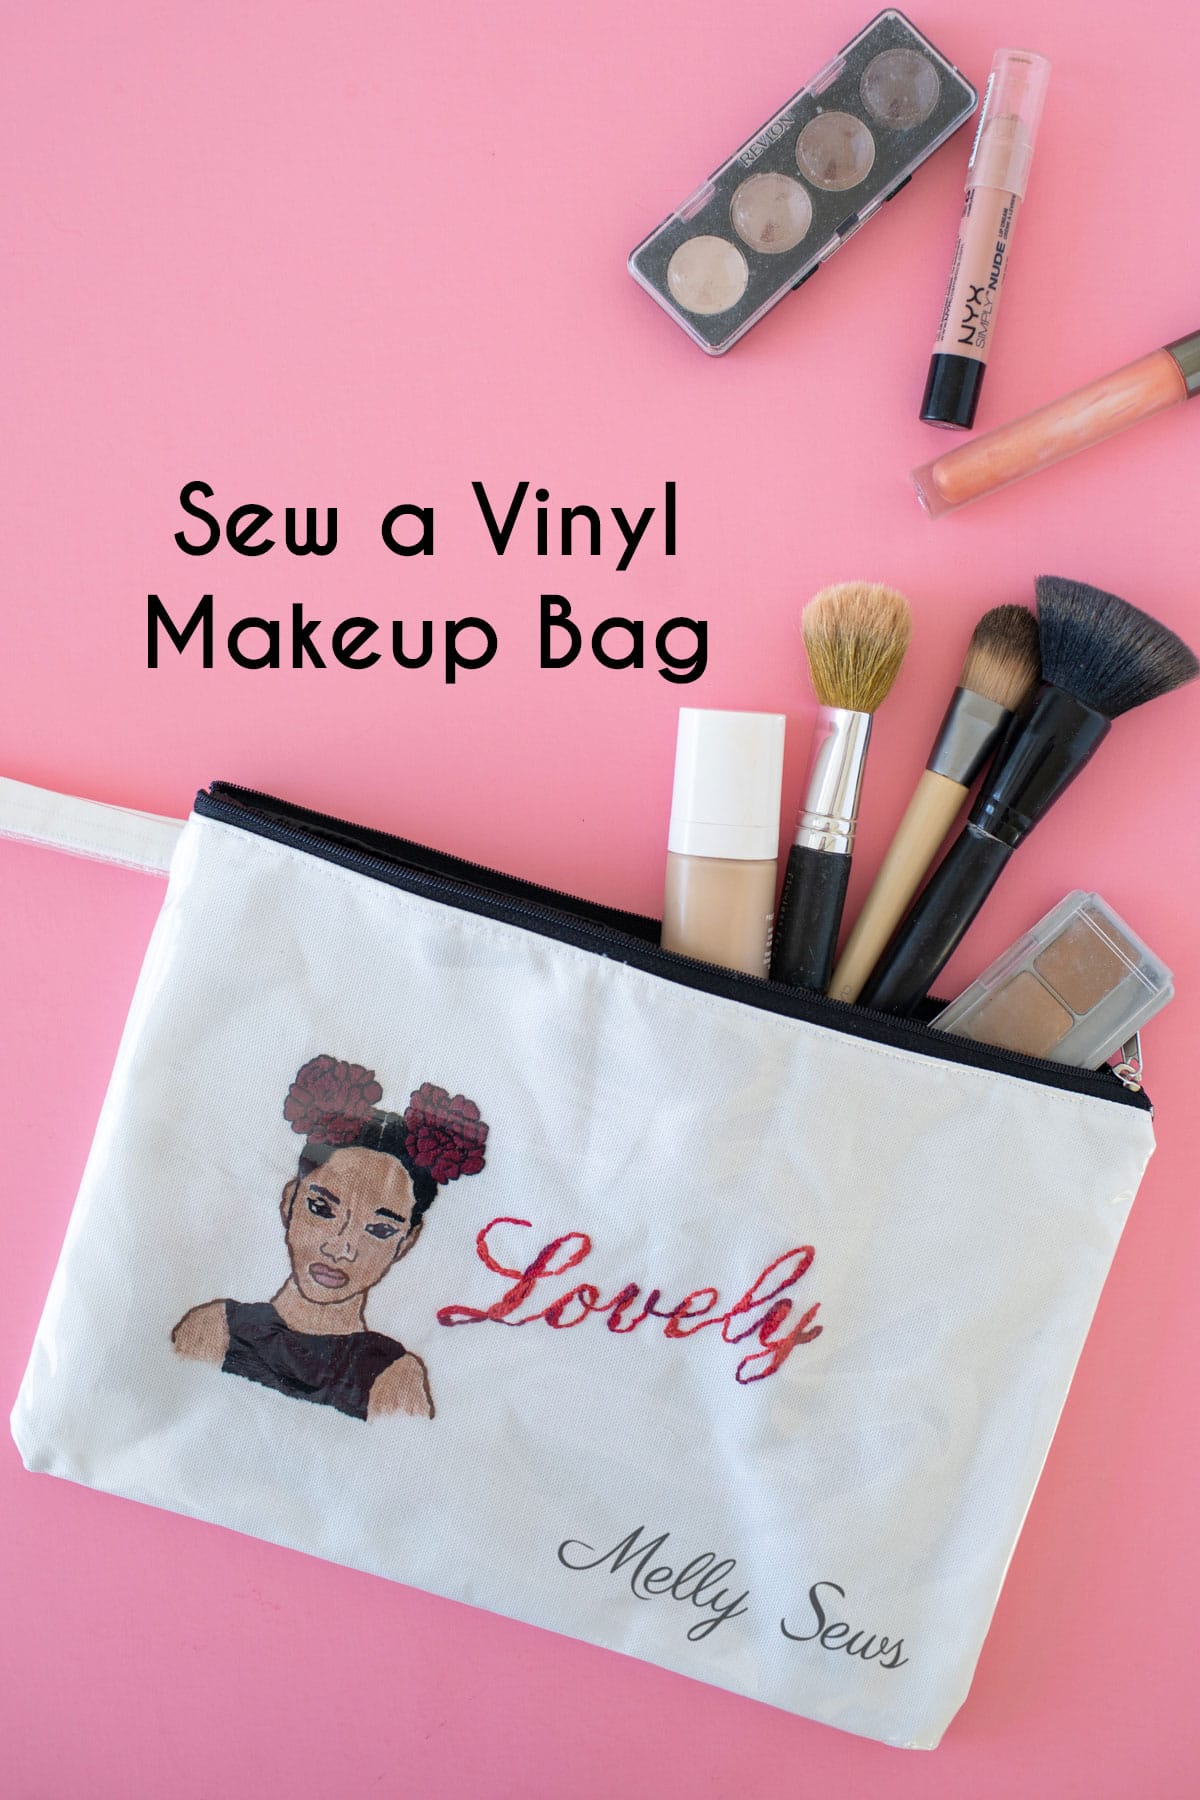 How to Sew a Makeup - Easy to Clean Vinyl Bag - Melly Sews